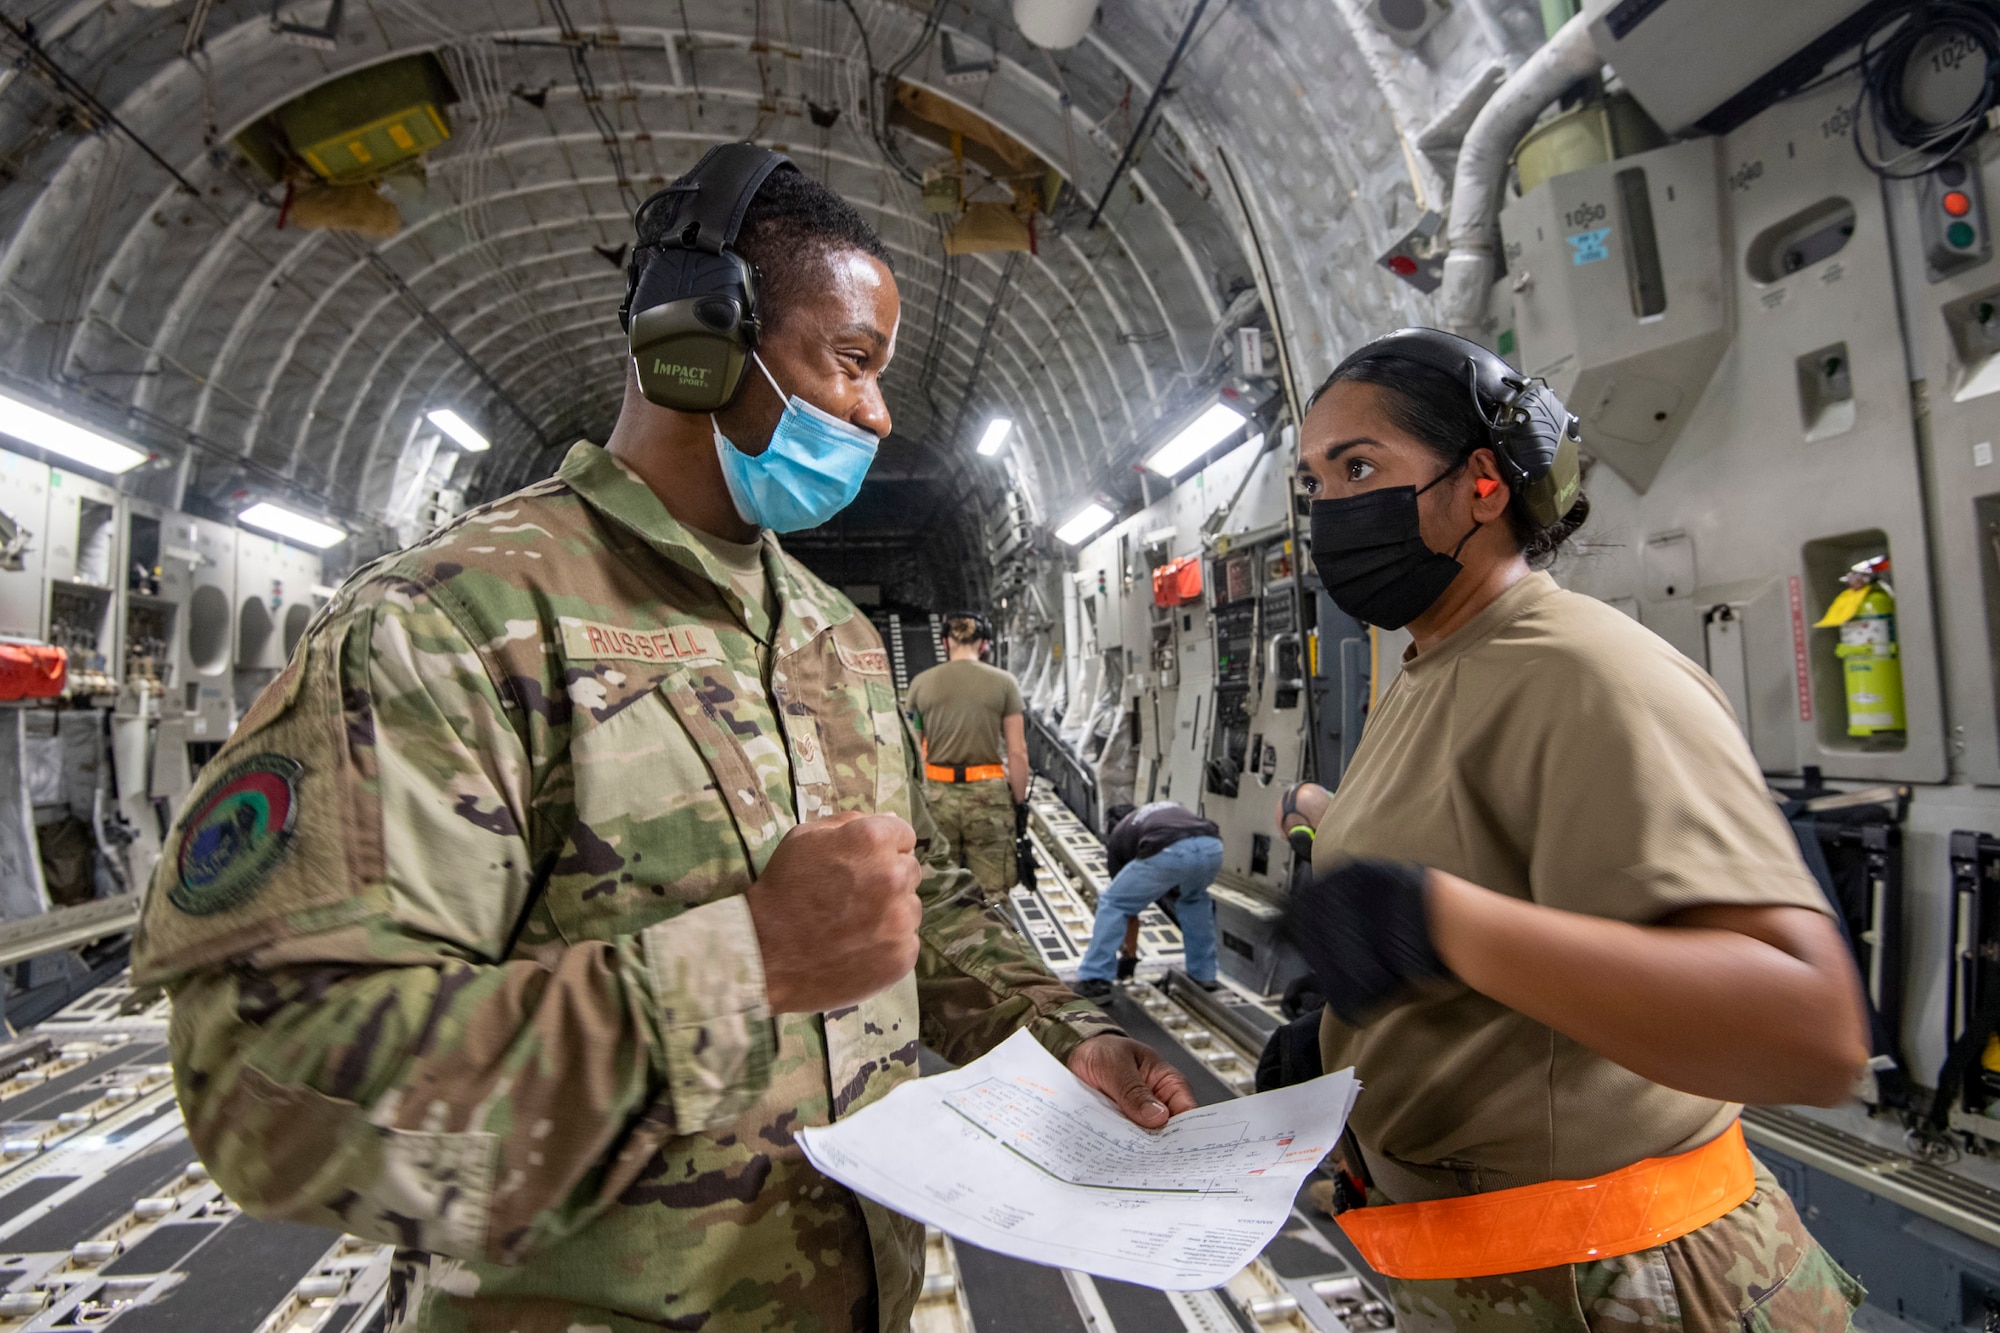 Staff Sgt. Rontrell Russell (left) and Senior Airman Nigeleene Eltagonde, 48th Aerial Port Squadron, cargo specialists, discuss the manifest to ensure all cargo has been accounted for while on a Hawaii Air National Guard C-17 from the 154th Wing, Joint Base Pearl Harbor-Hickam, Jan. 20, 2022.